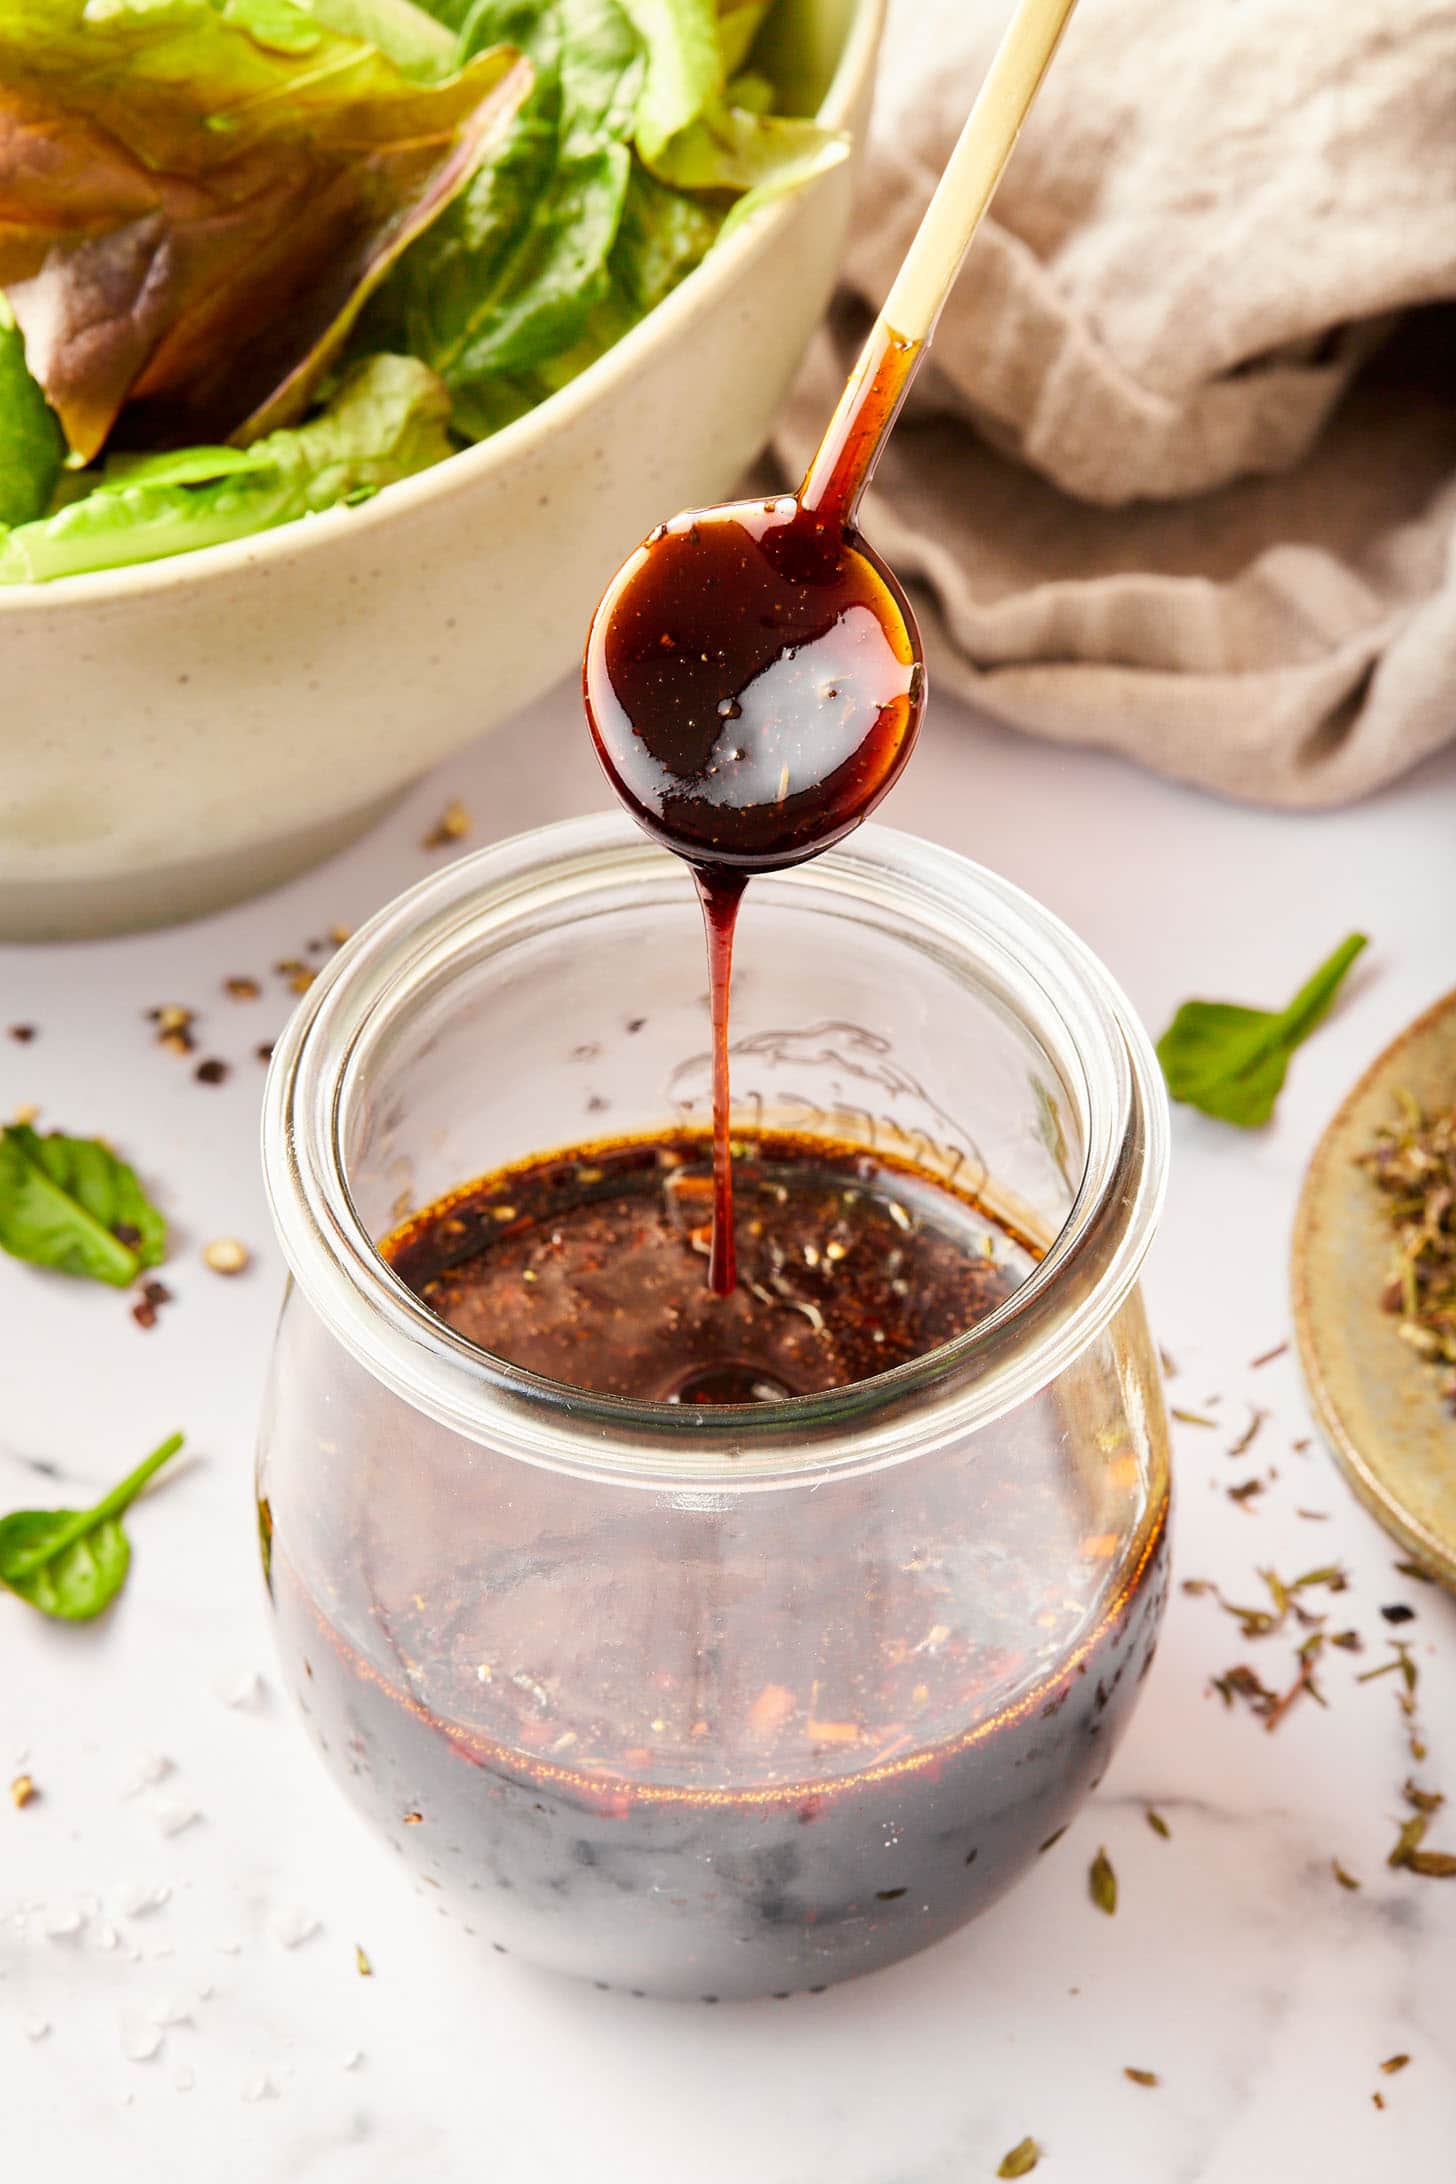 Recipe A - Vinaigrette Balsamic Spicy Perspective